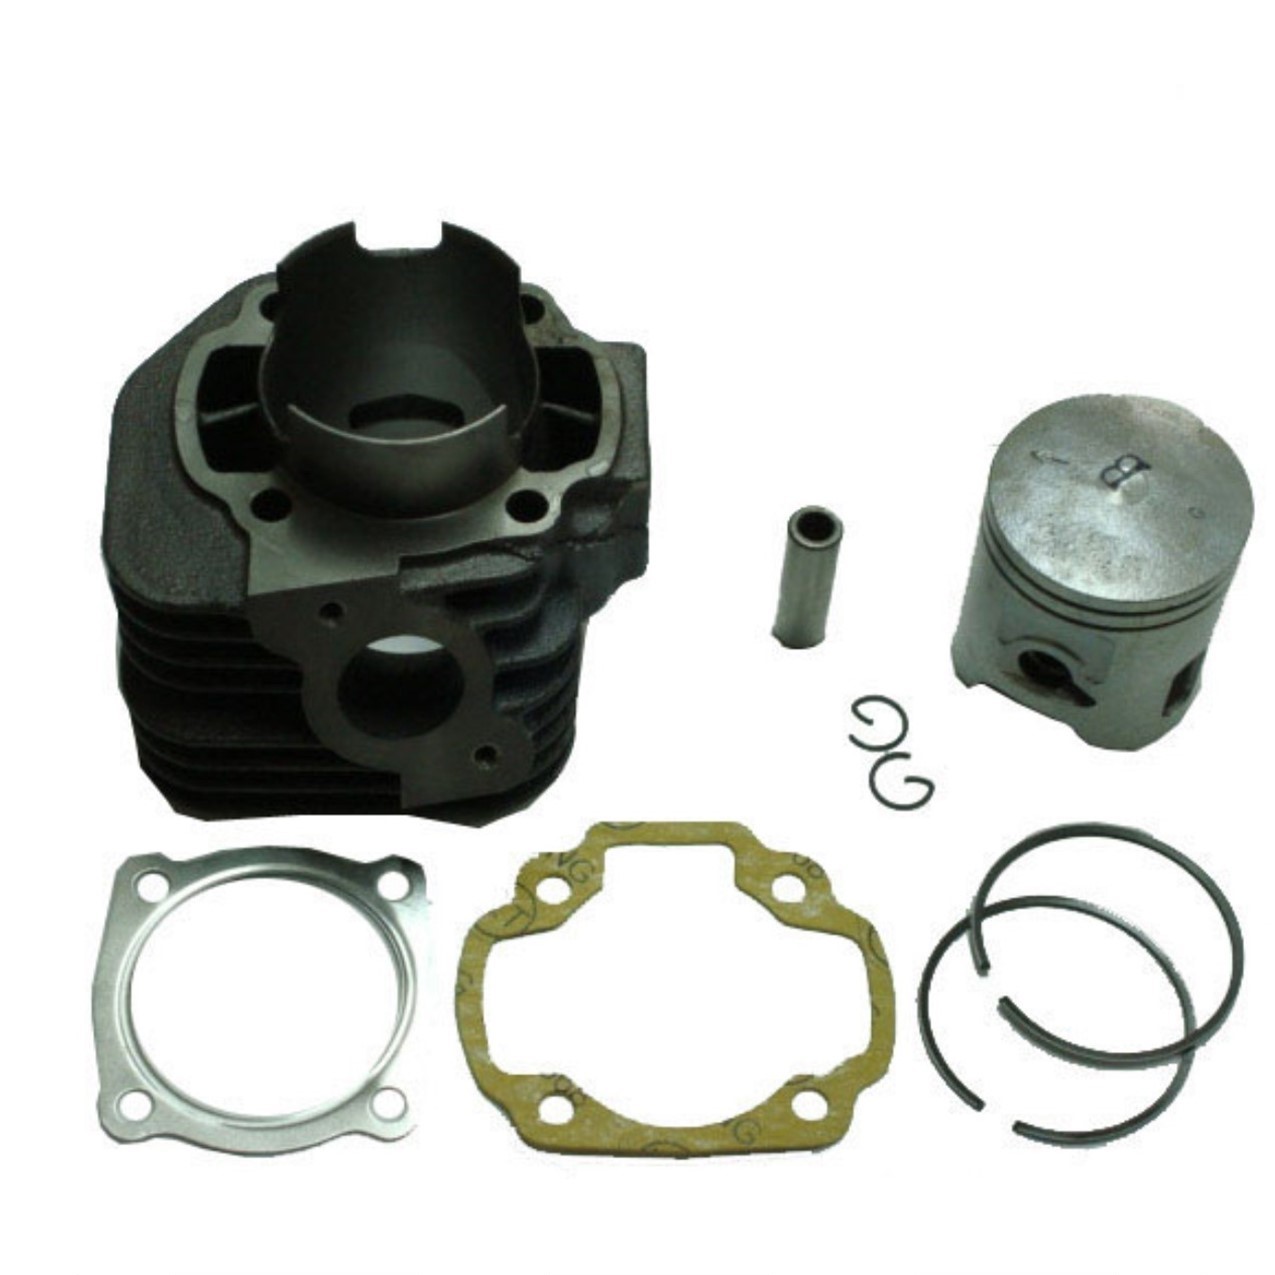 Cylinder Piston Top End Kit 49cc 2 Stroke ATVs, Scooters B=40mm Pin=12mm H=64mm CPI Models Only - Click Image to Close